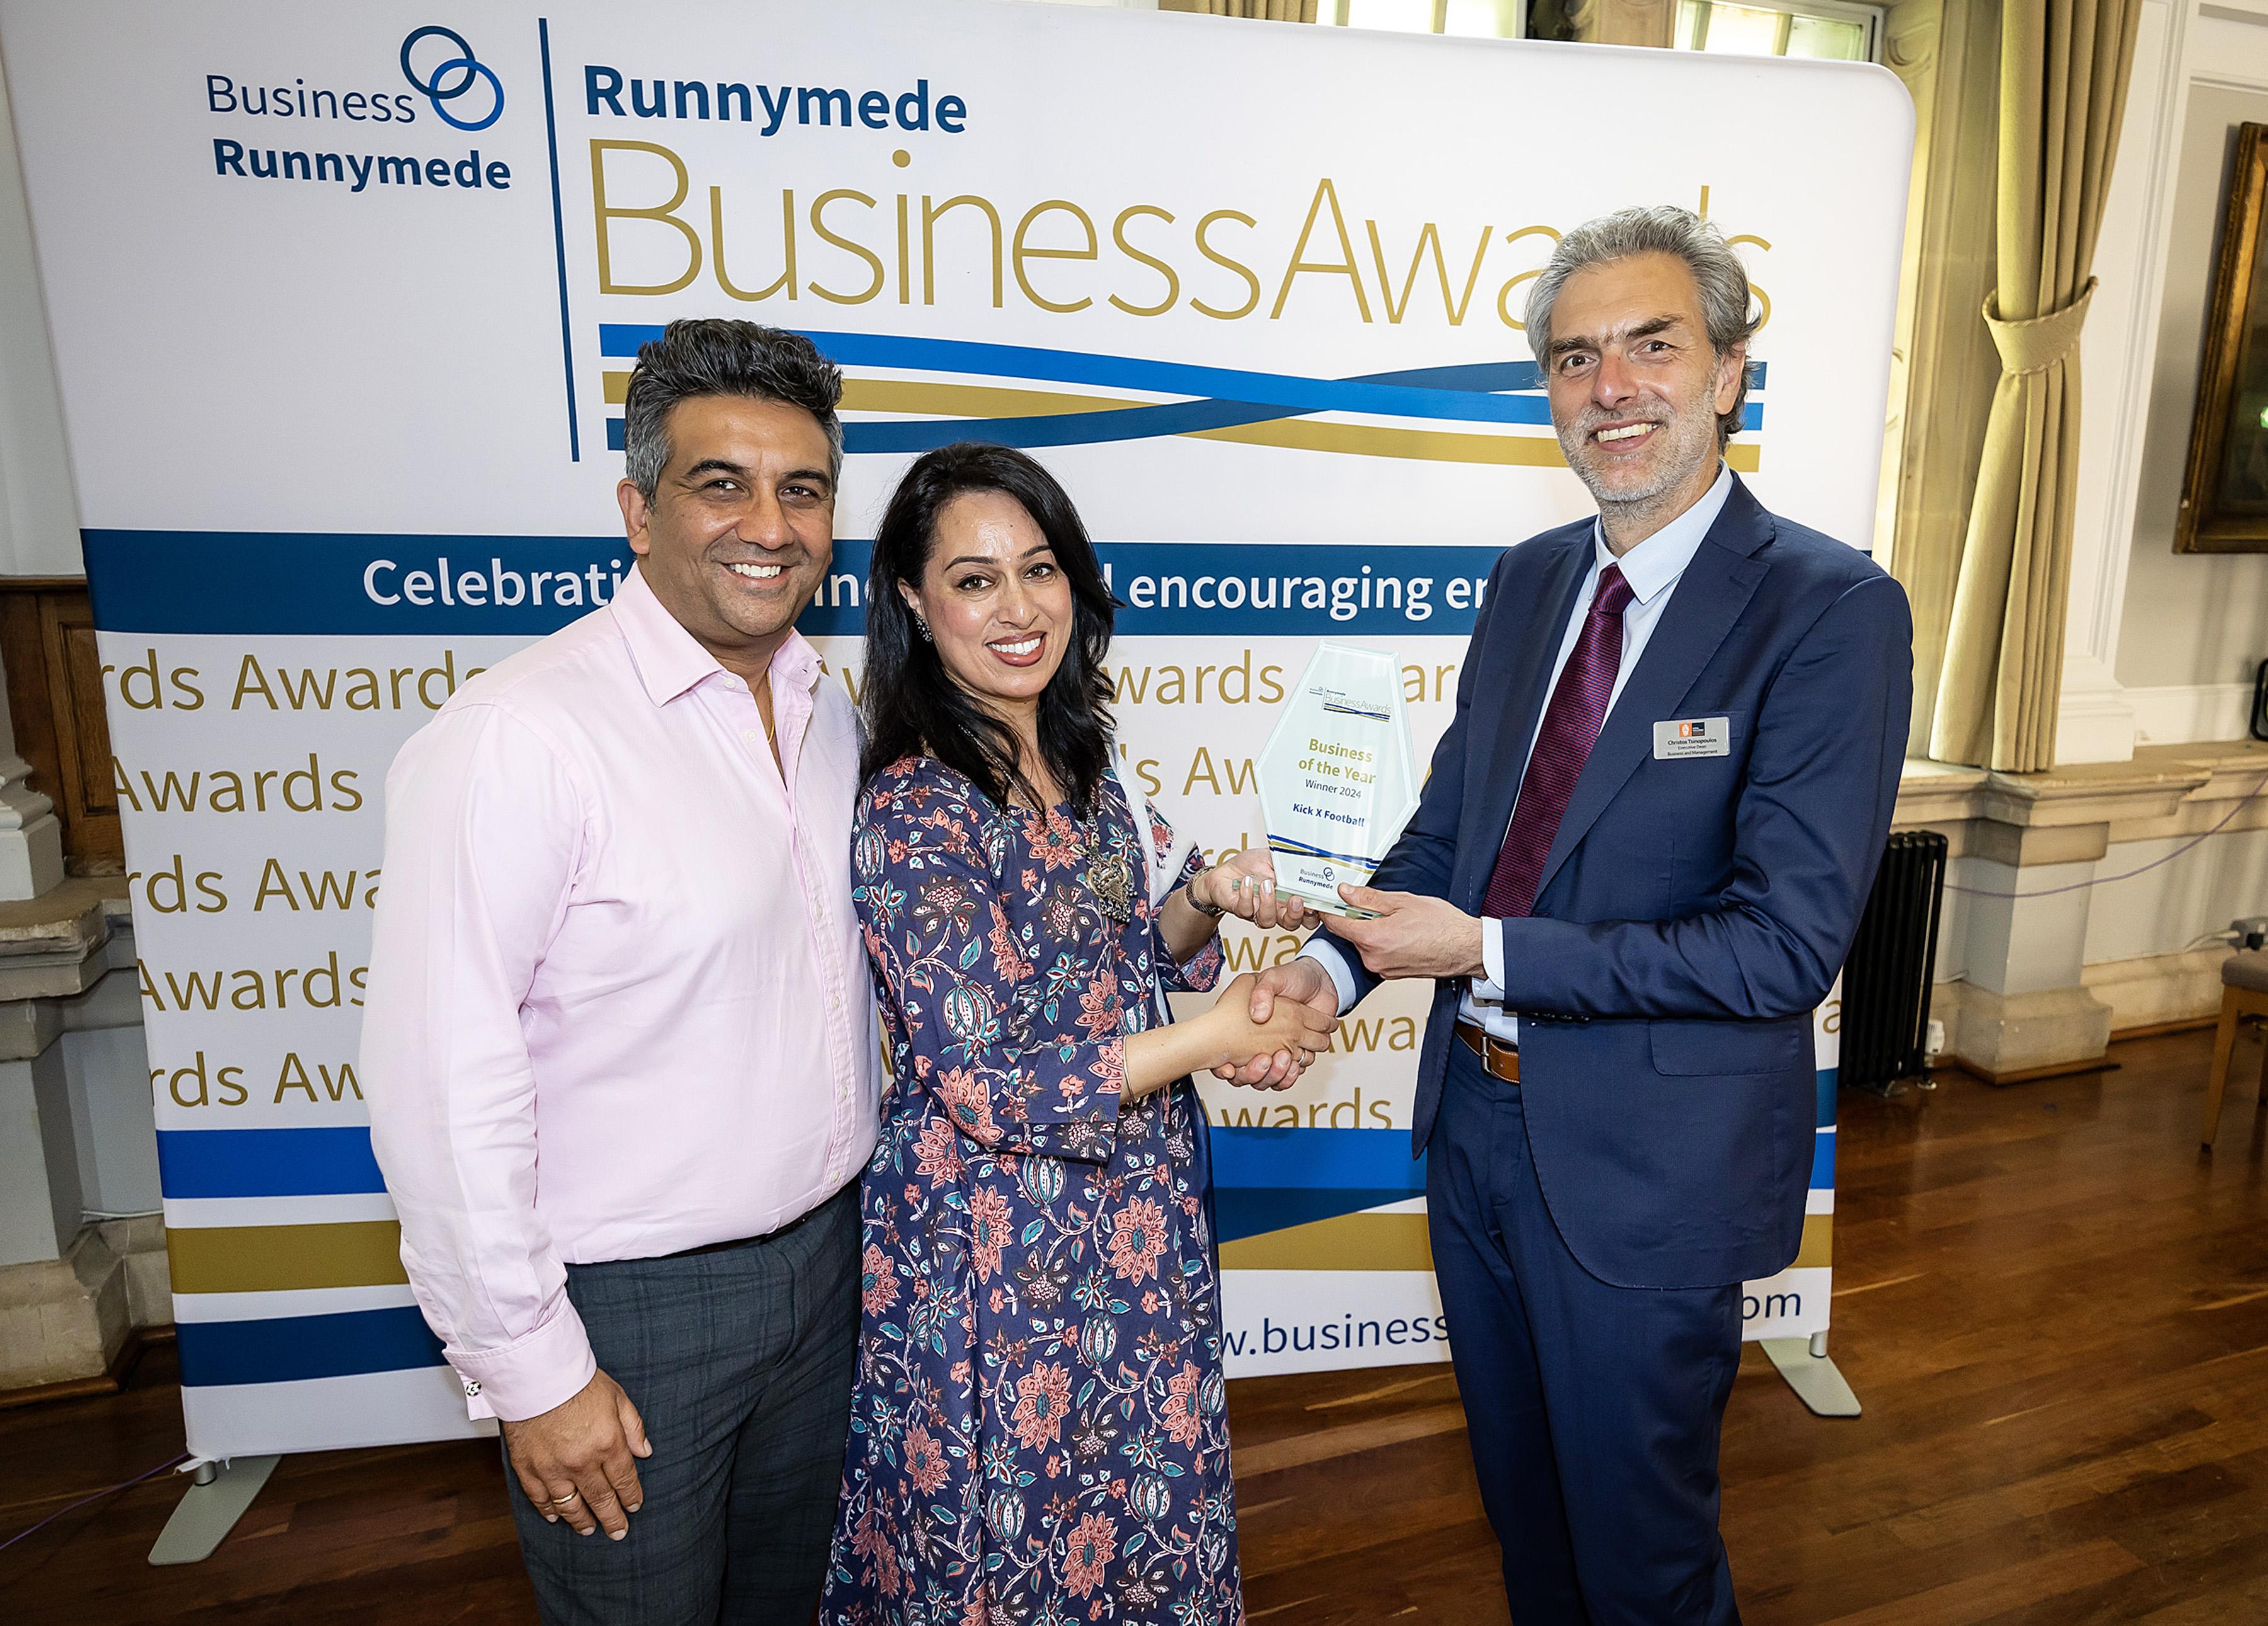 The KickX team receive the Business of the Year award from Royal Holloway's Christos Tsinopoulos.